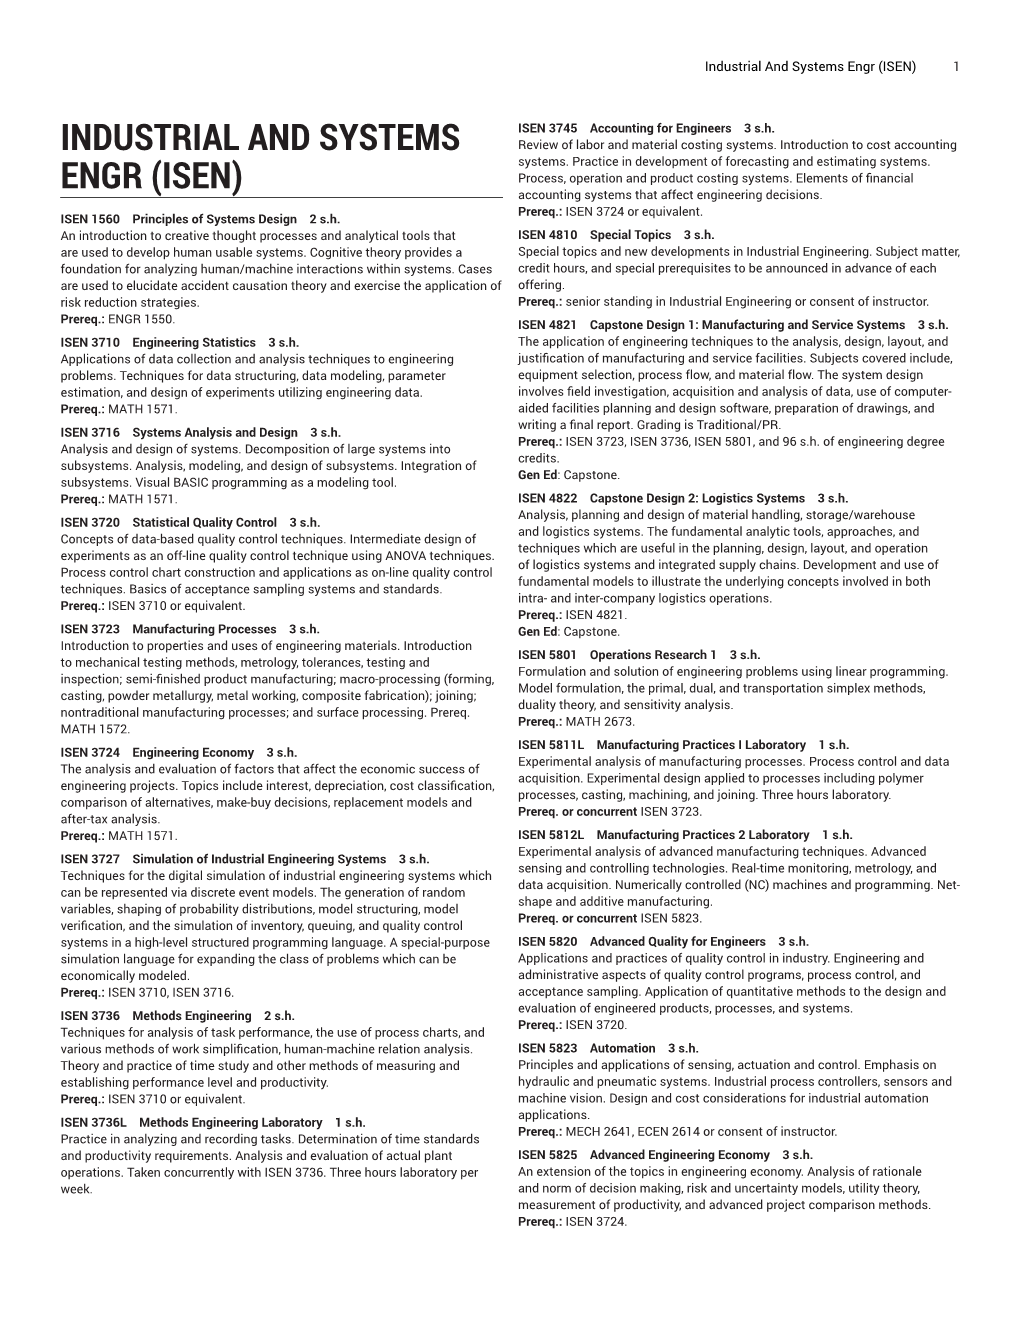 Industrial and Systems Engr (ISEN) 1